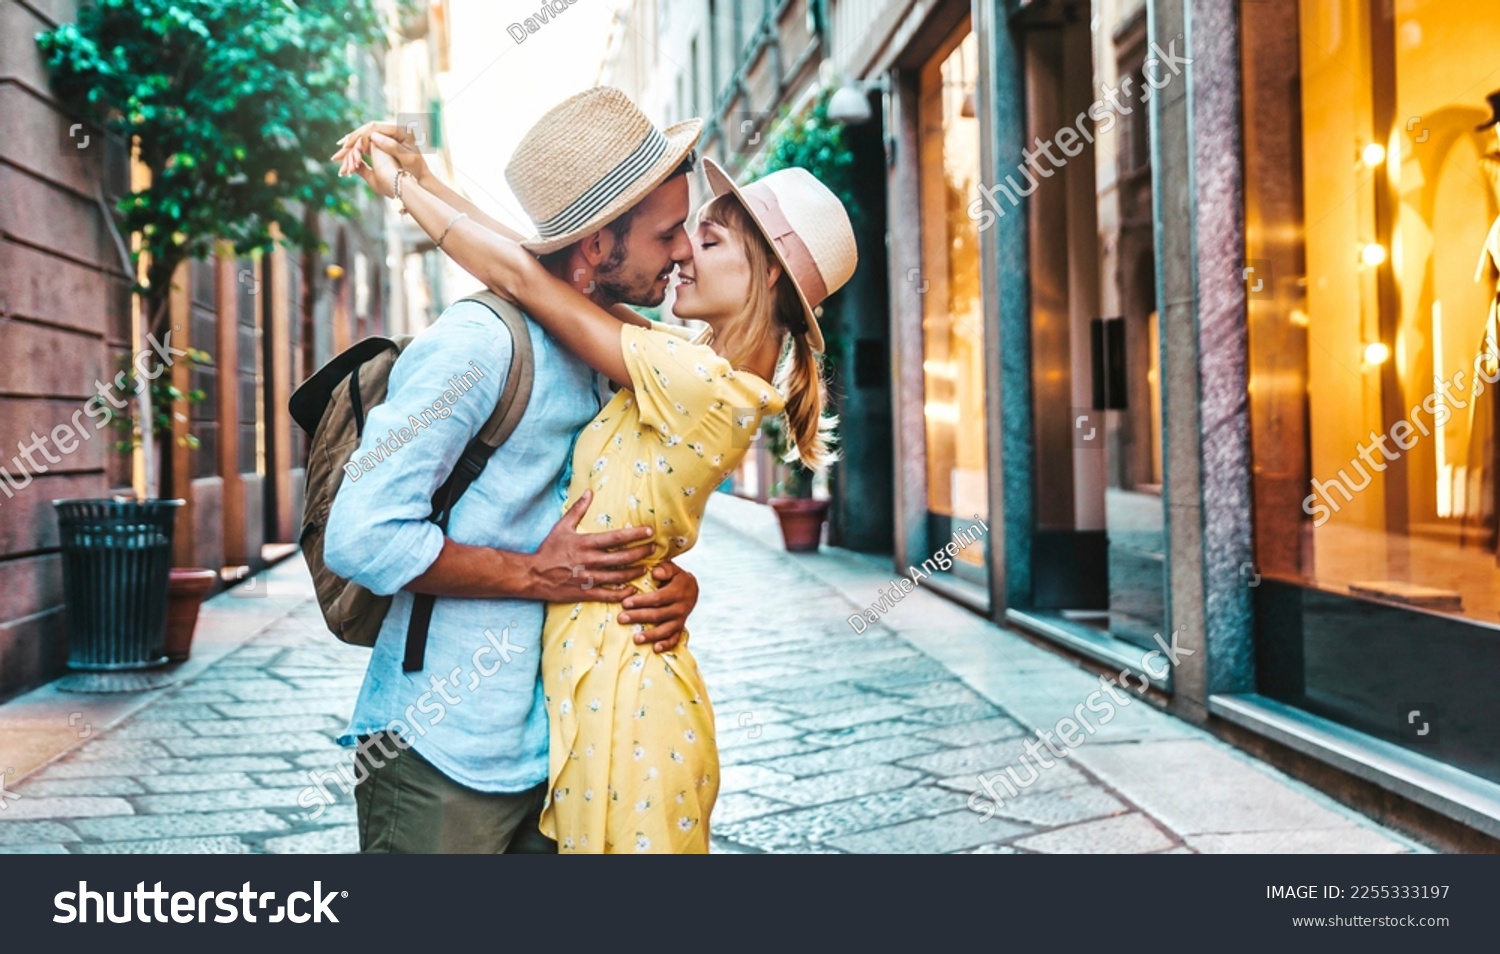 Couple of lovers kissing on city street - Two tourists enjoying romantic vacation together - Boyfriend and girlfriend dating outside - Love, tourism and life style concept #2255333197